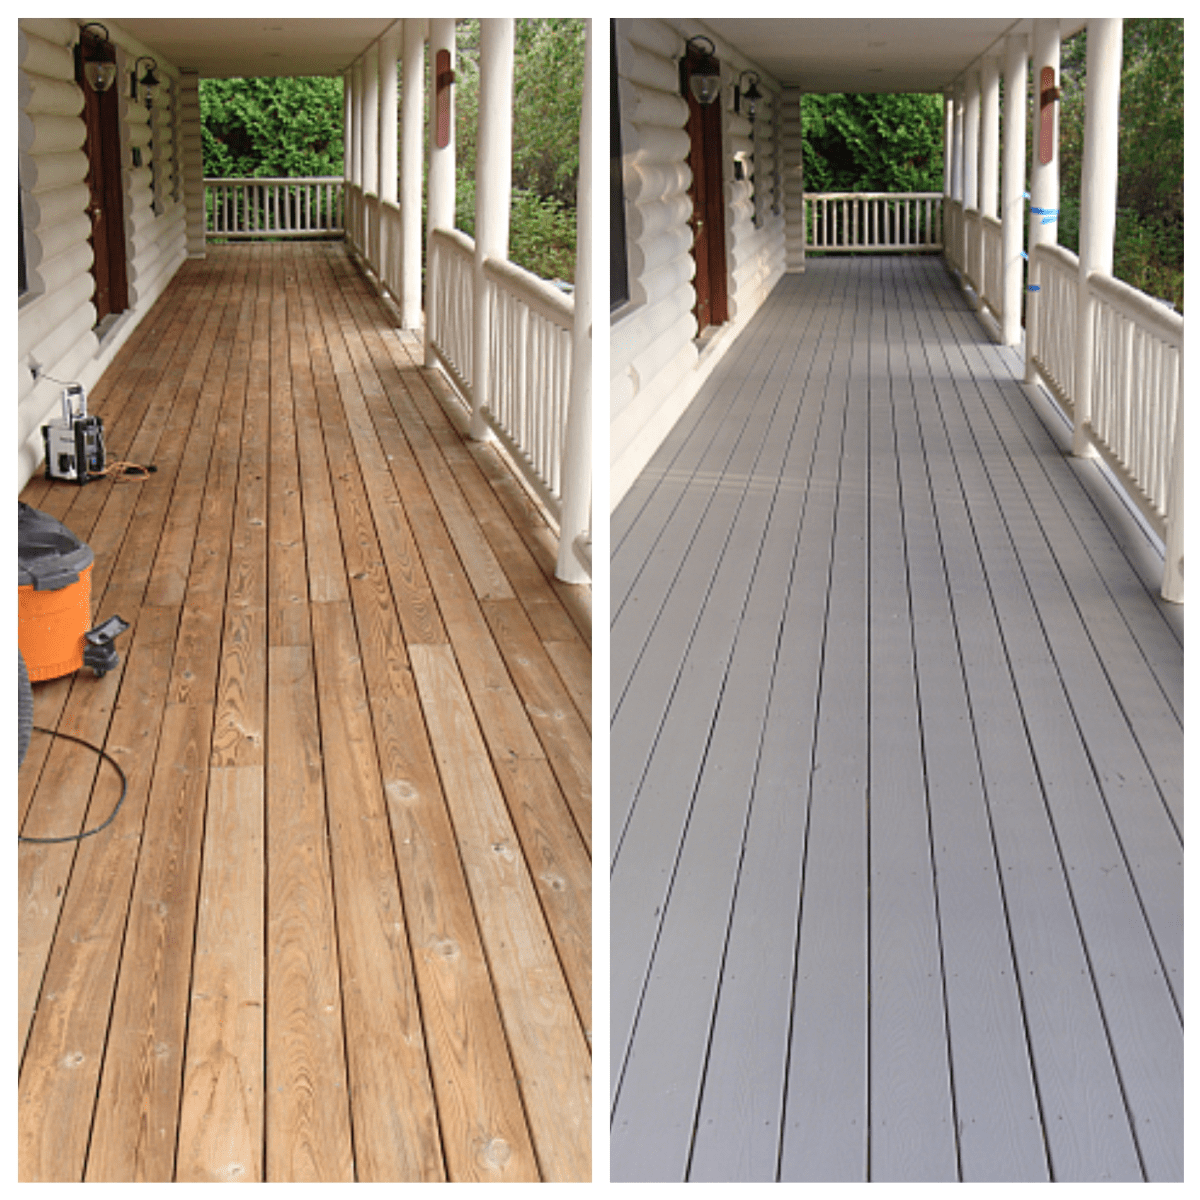 Tips For Painting A Porch Floor Dengarden, How To Prepare Hardwood Floors For Painting